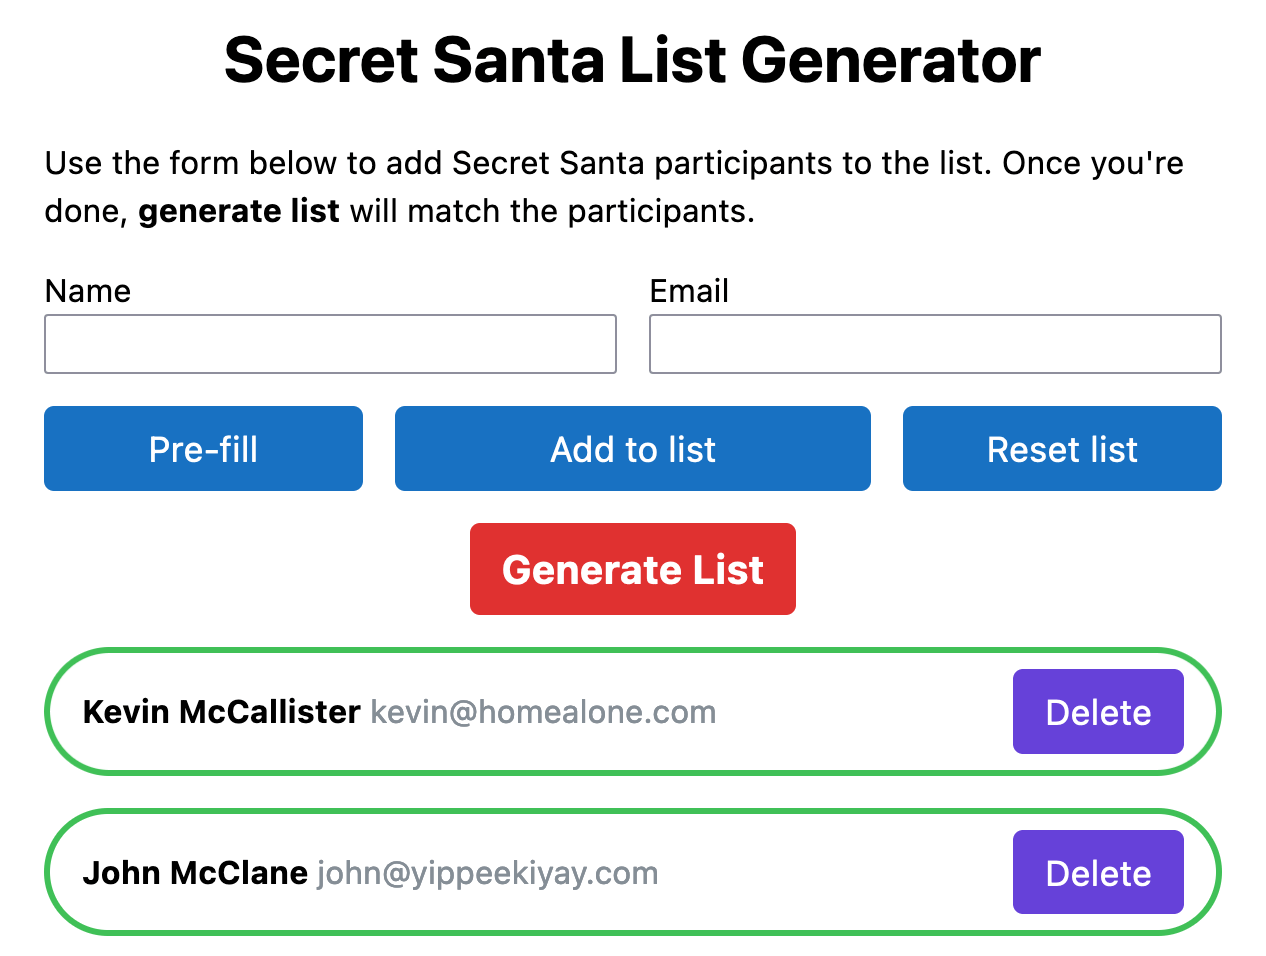 Screenshot of the Secret Santa demo. It shows a form where you can enter Name and Email. Two names are displayed under the form: Kevin McCallister and John McClane. Each name has a delete button next to it.